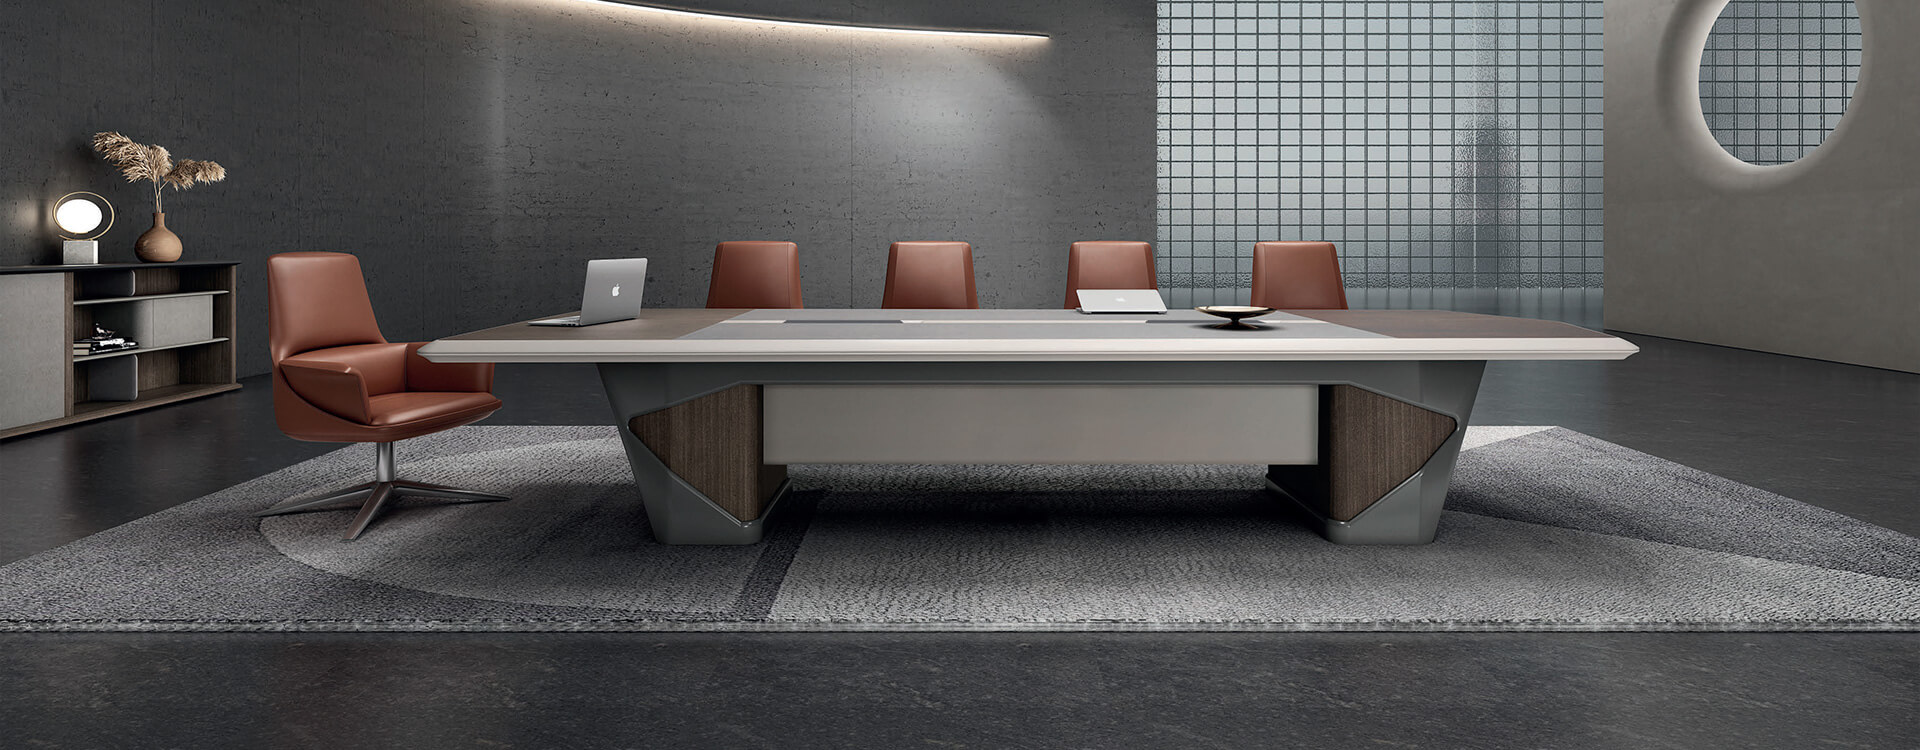 Maddison series conference table for office